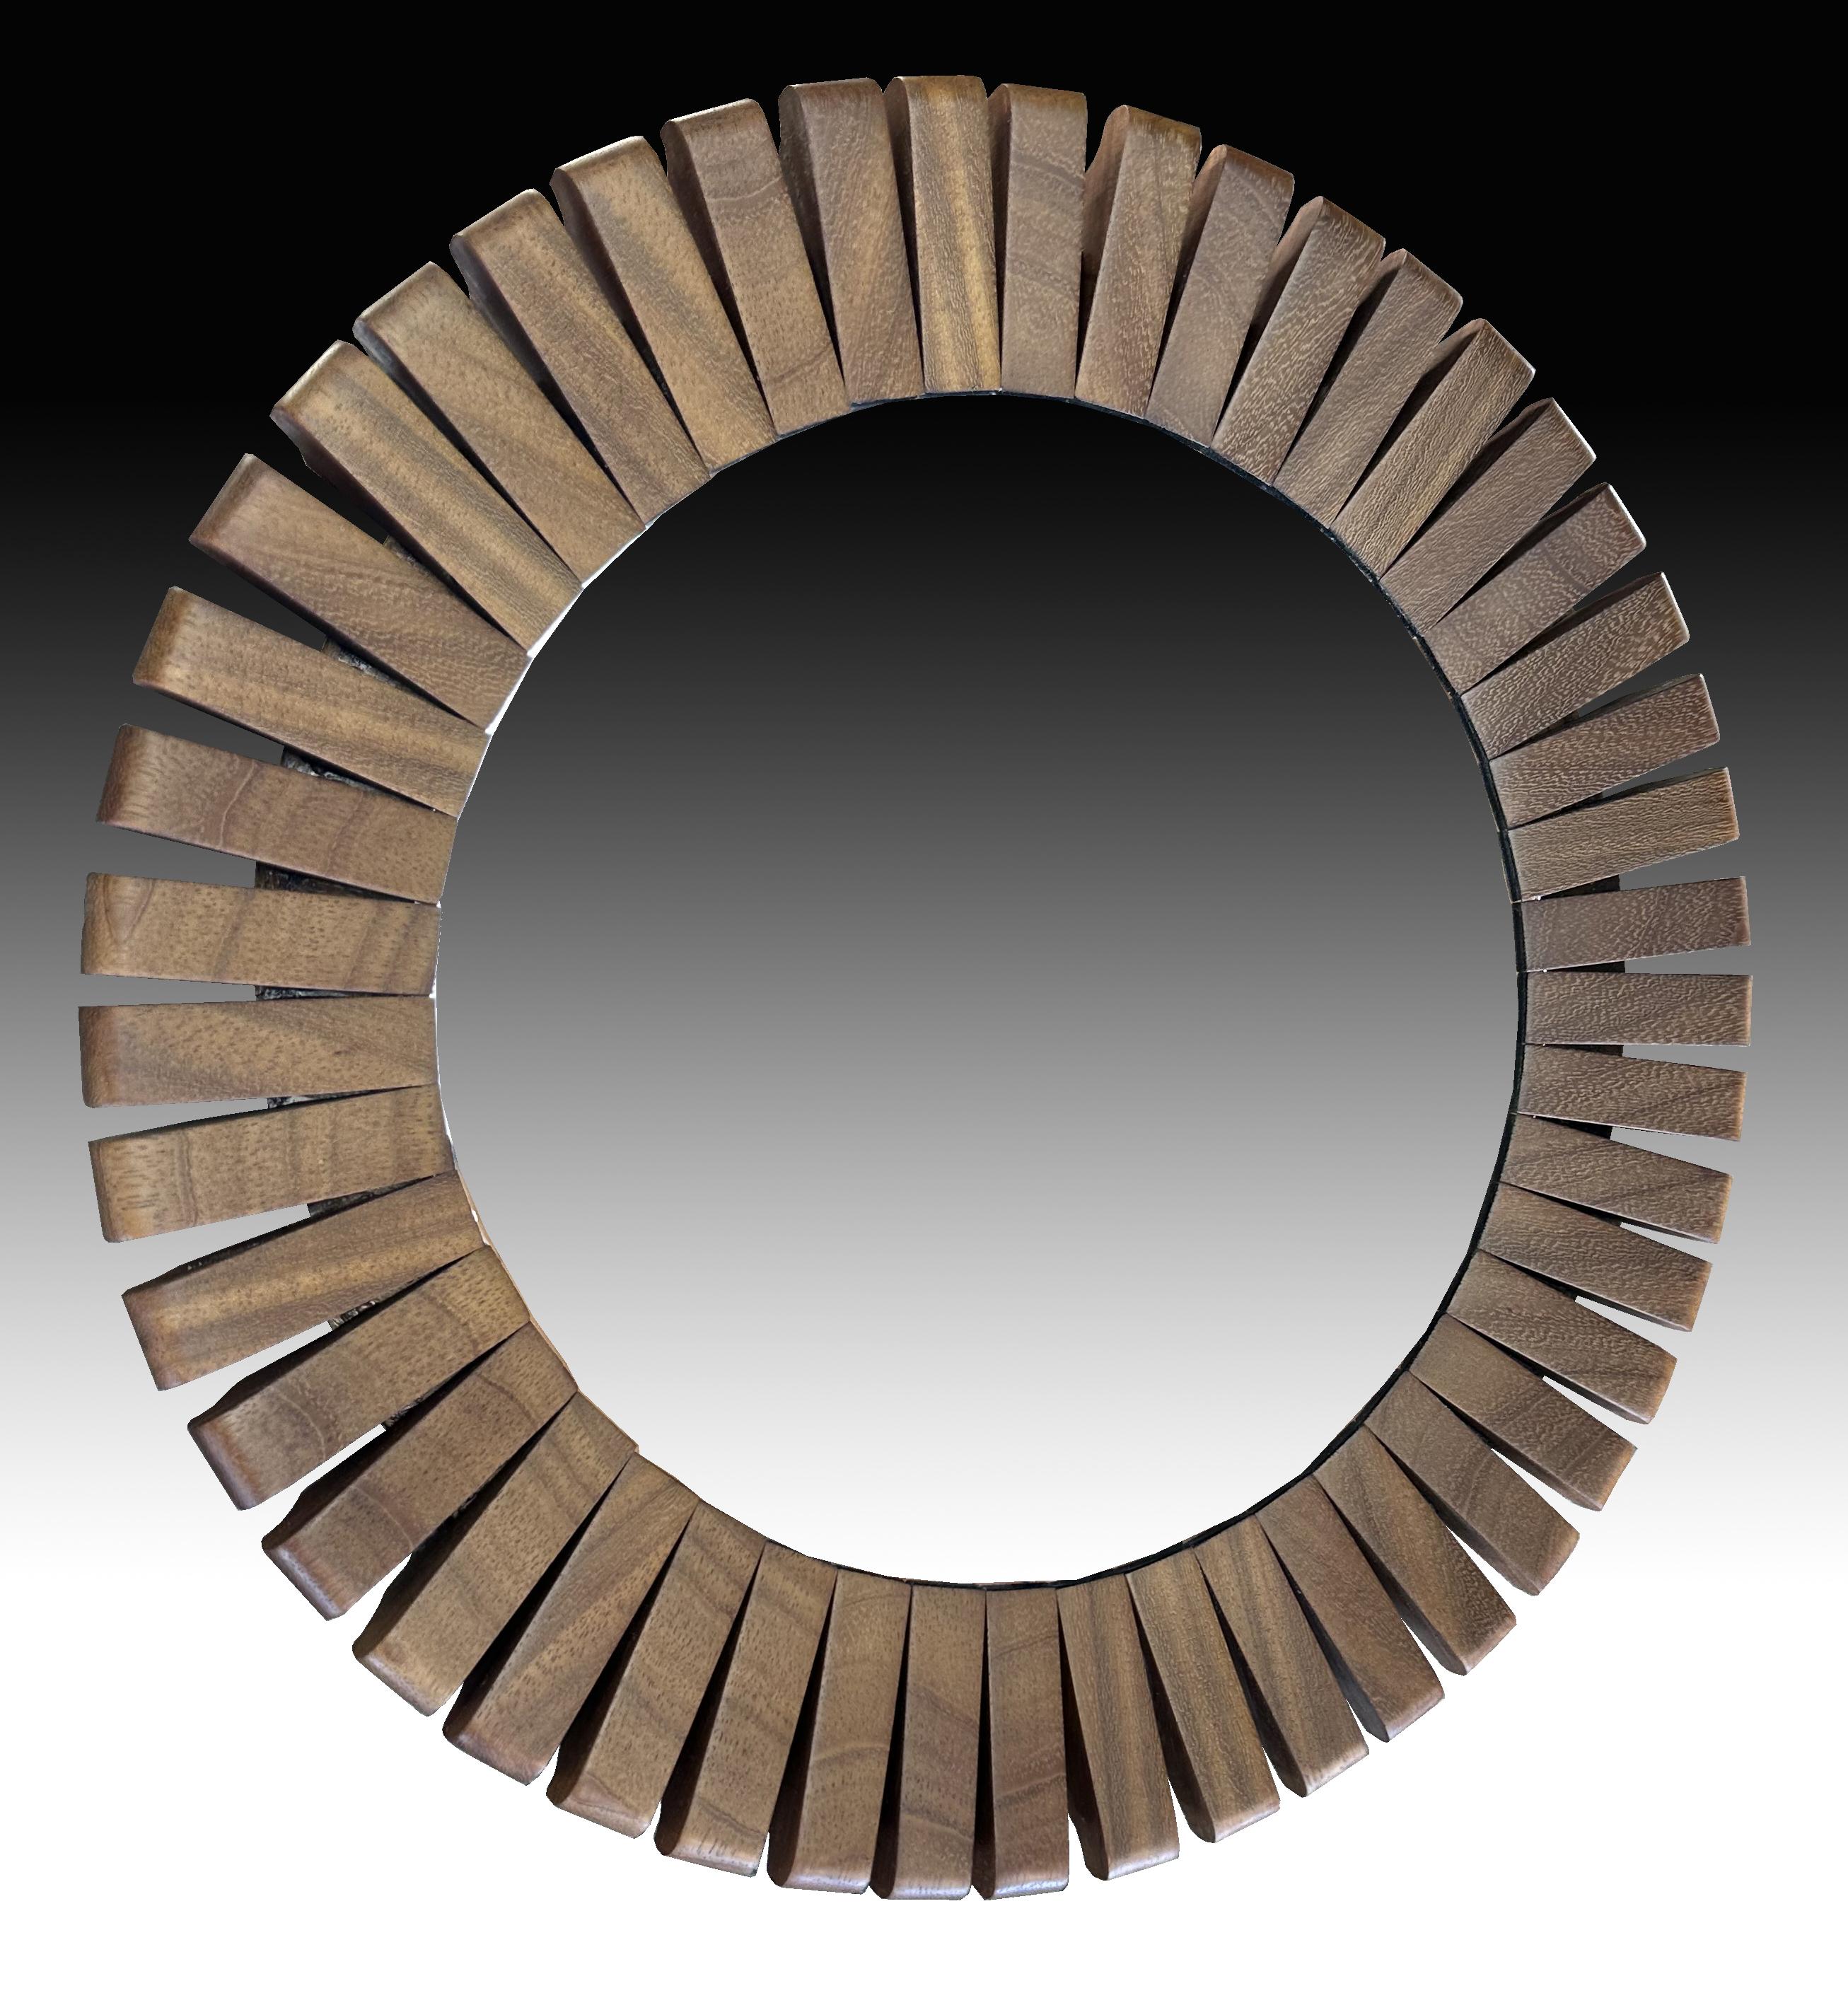 A really nice segmented frame circular mirror, the whole in very good condition with no blemishes on either mirror glass or frame.
theactual mirror glass is 38cm diameter and the frame 56 cm overall.